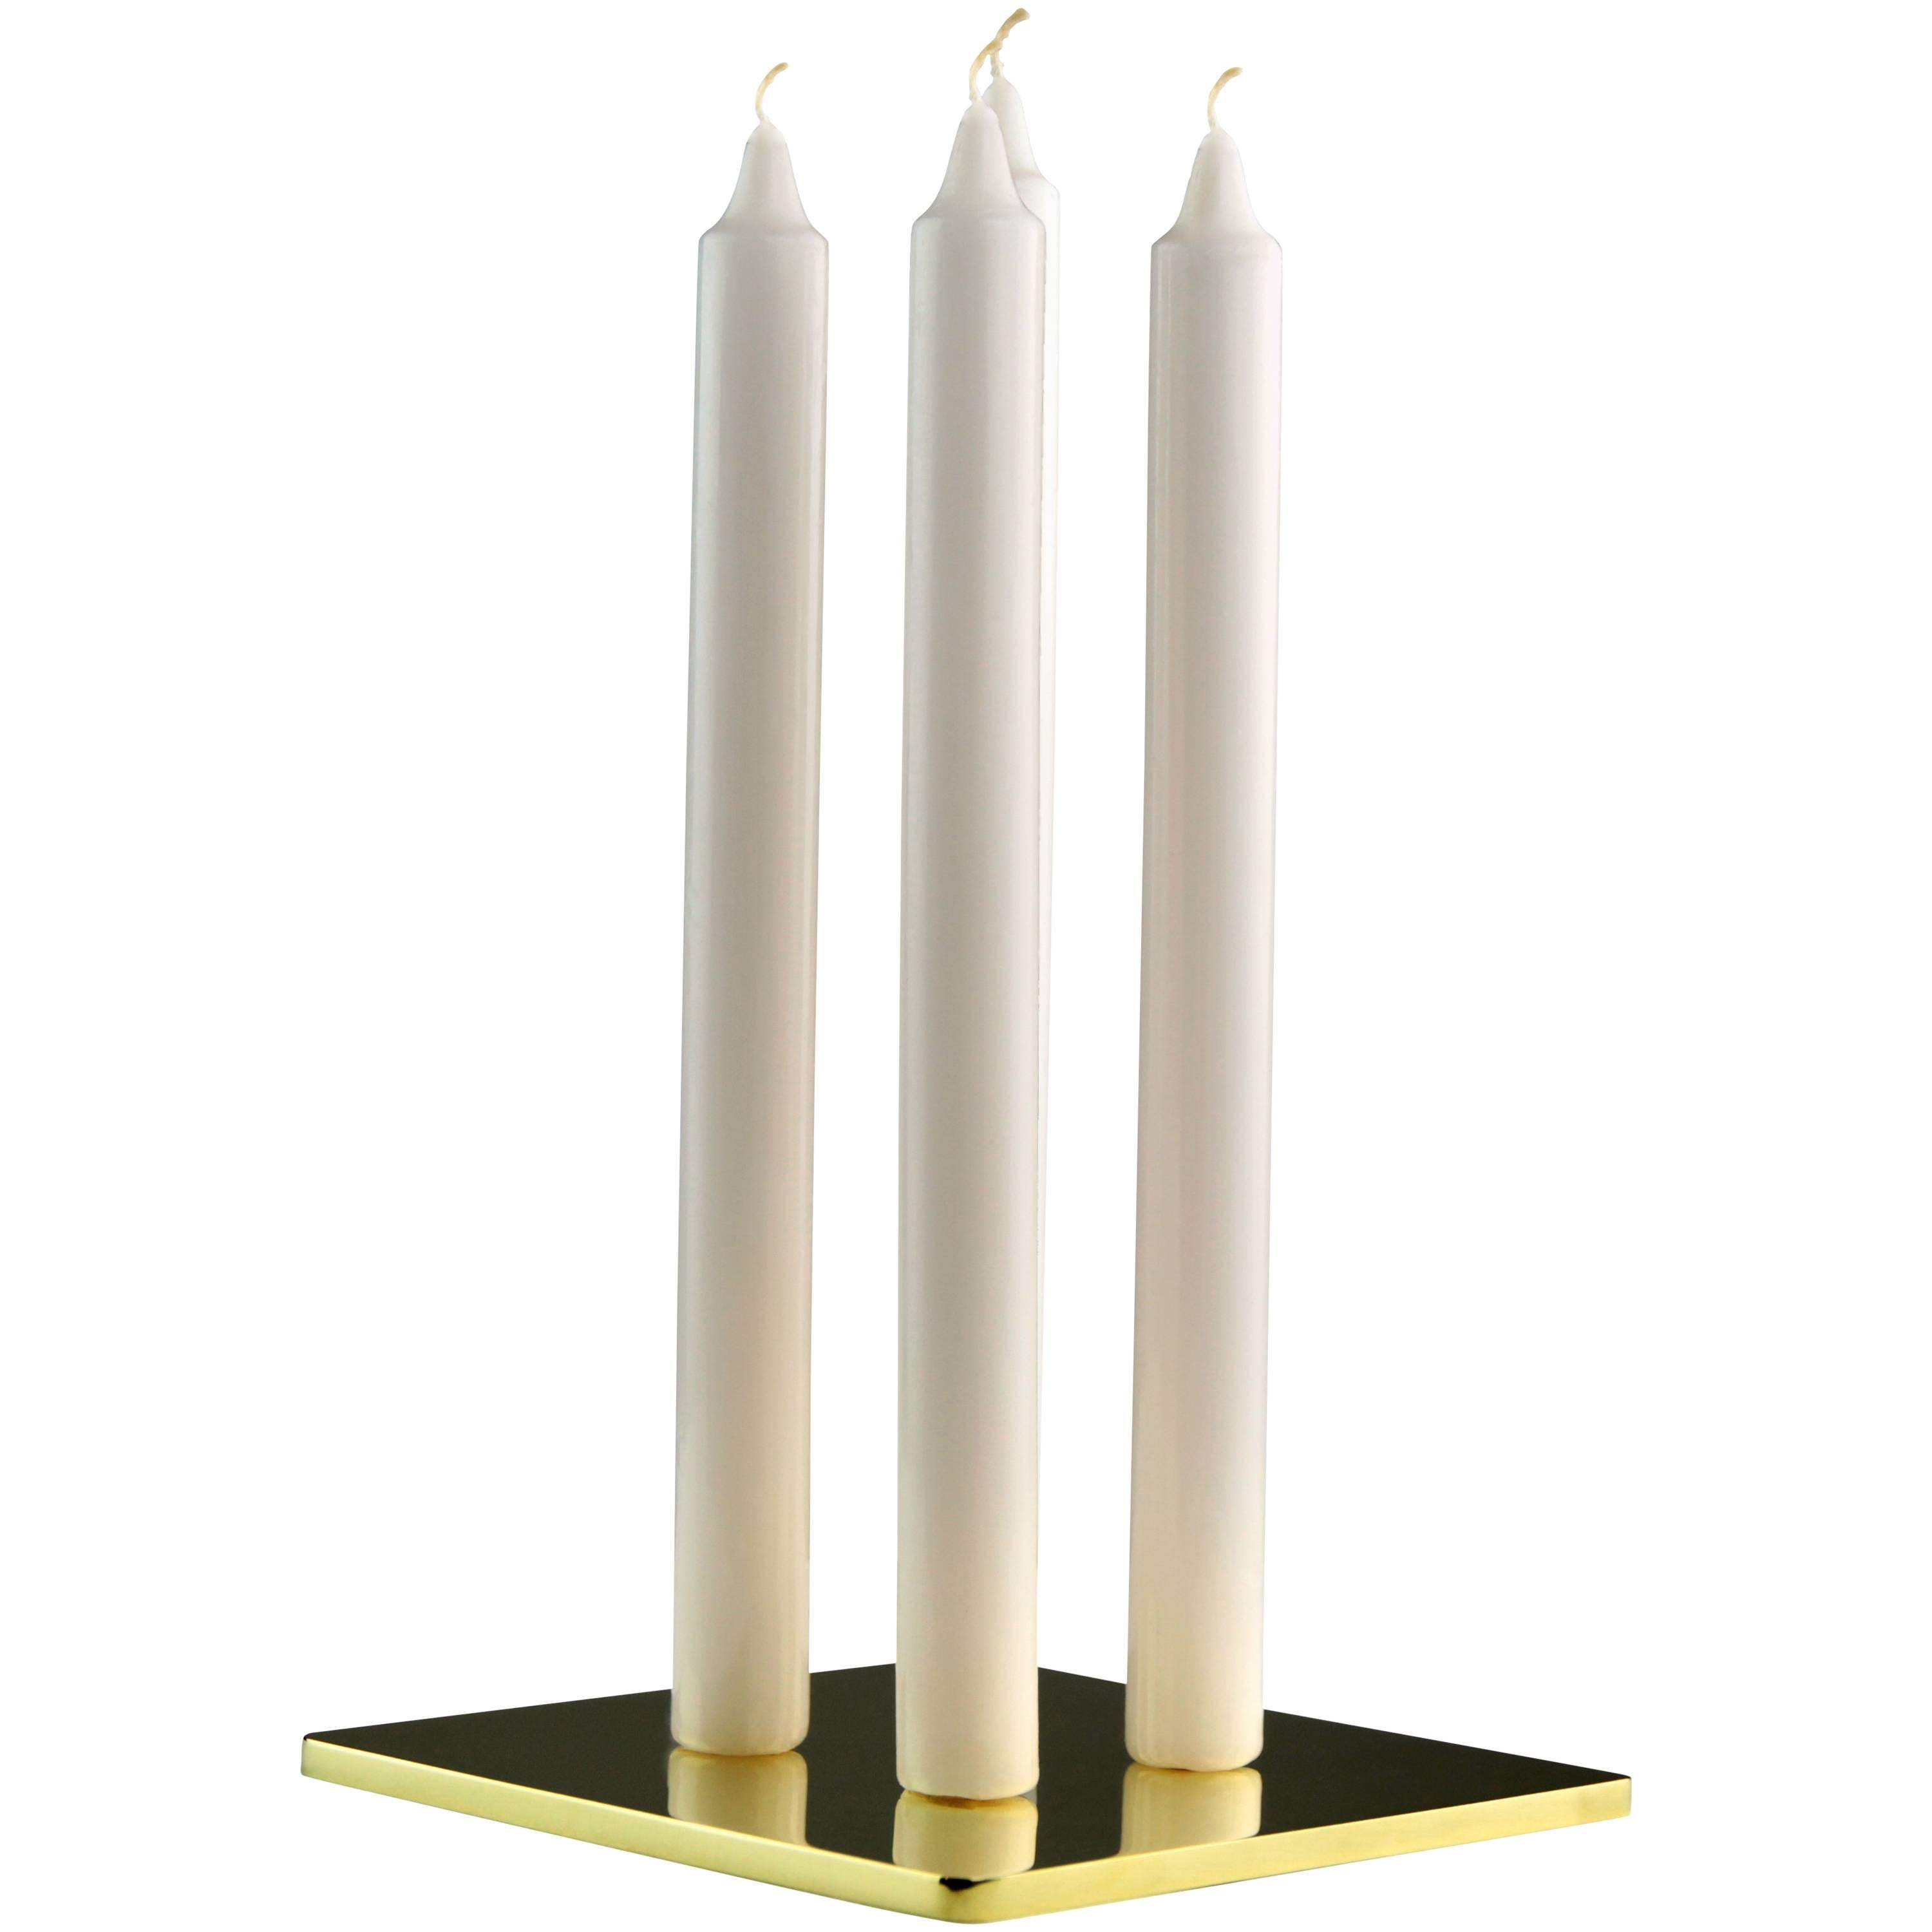 The Nordic Candleholder in High Polished Brass, Quadruple